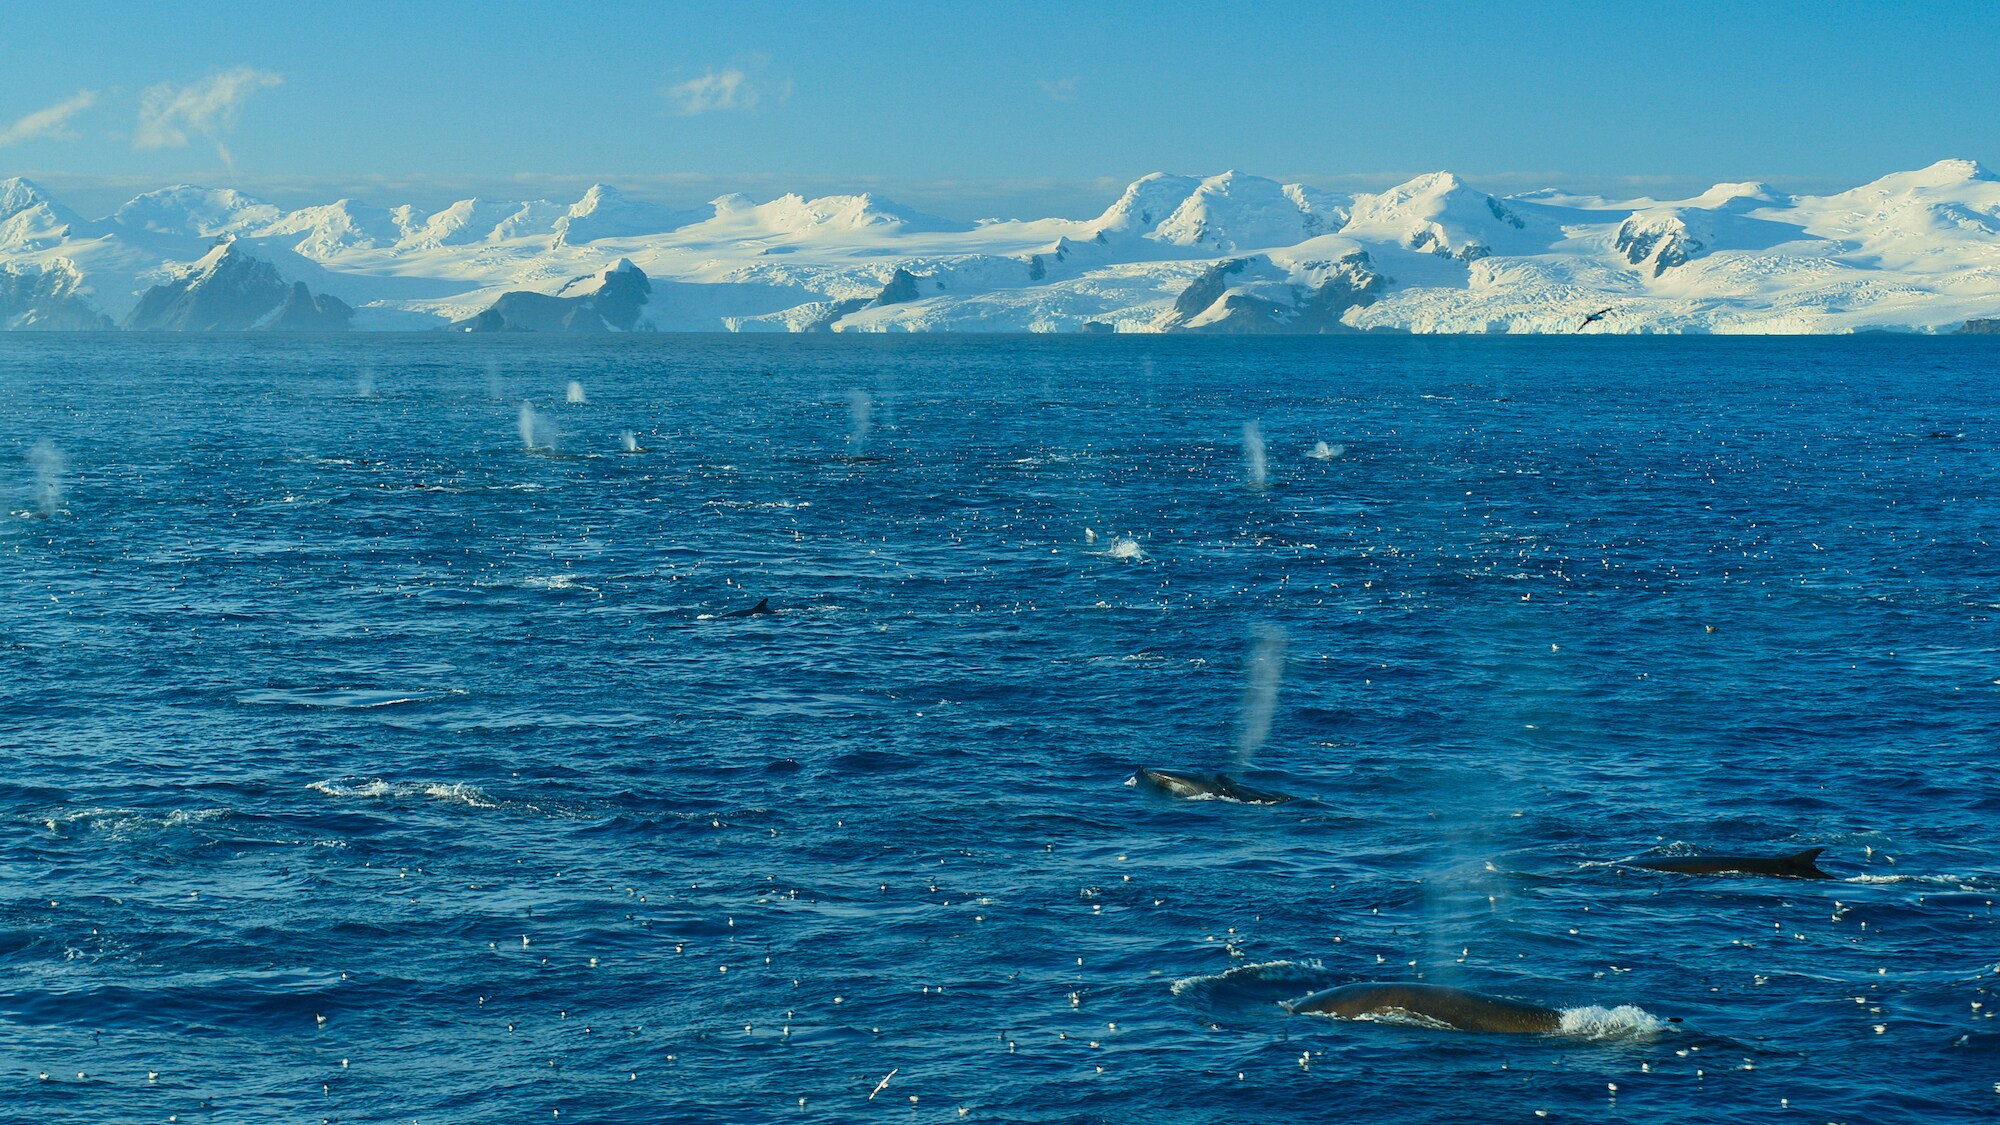 A gathering of fin whales in the Southern Ocean. (Credit: National Geographic/Bertie Gregory for Disney+)